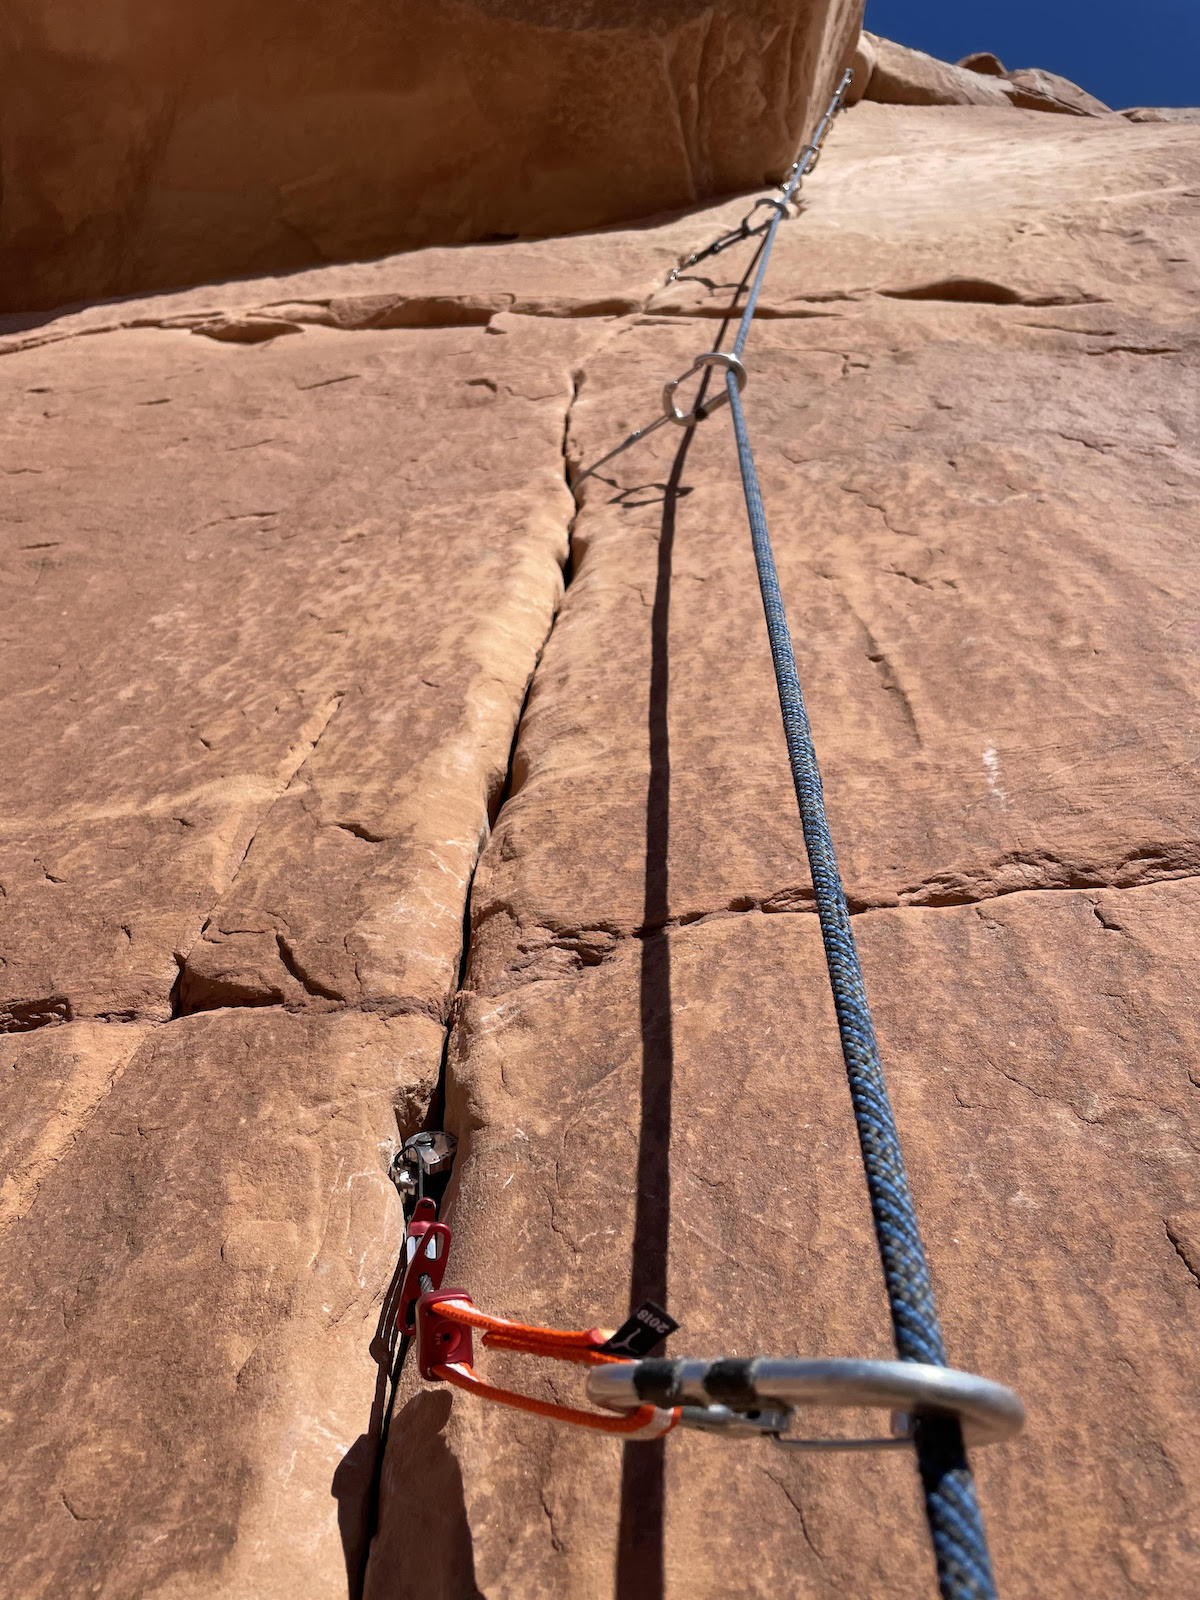 The #3/4 (orange/red) Metolius Ultralight Offset Master Cam was the author's very first placement on the first pitch of Zenyatta Entrada. [Photo] Derek Franz